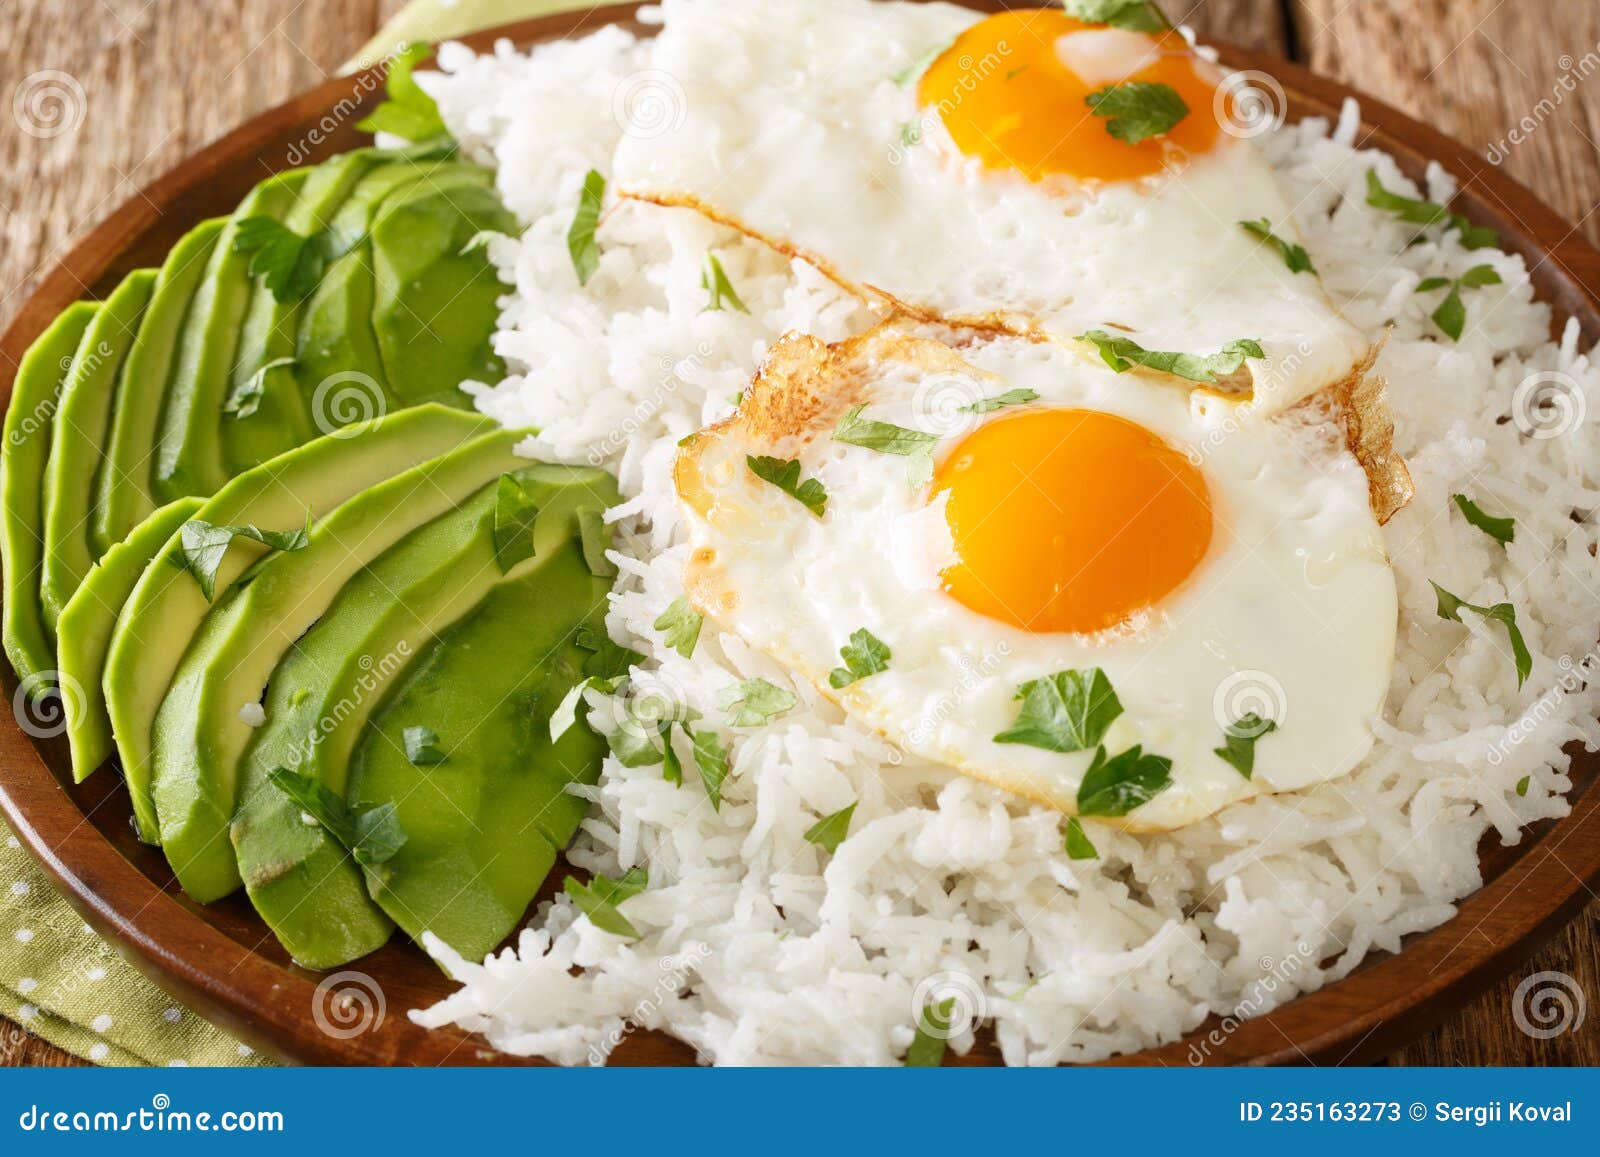 arroz con huevo frito is white rice and a fried egg close up in the plate. horizontal